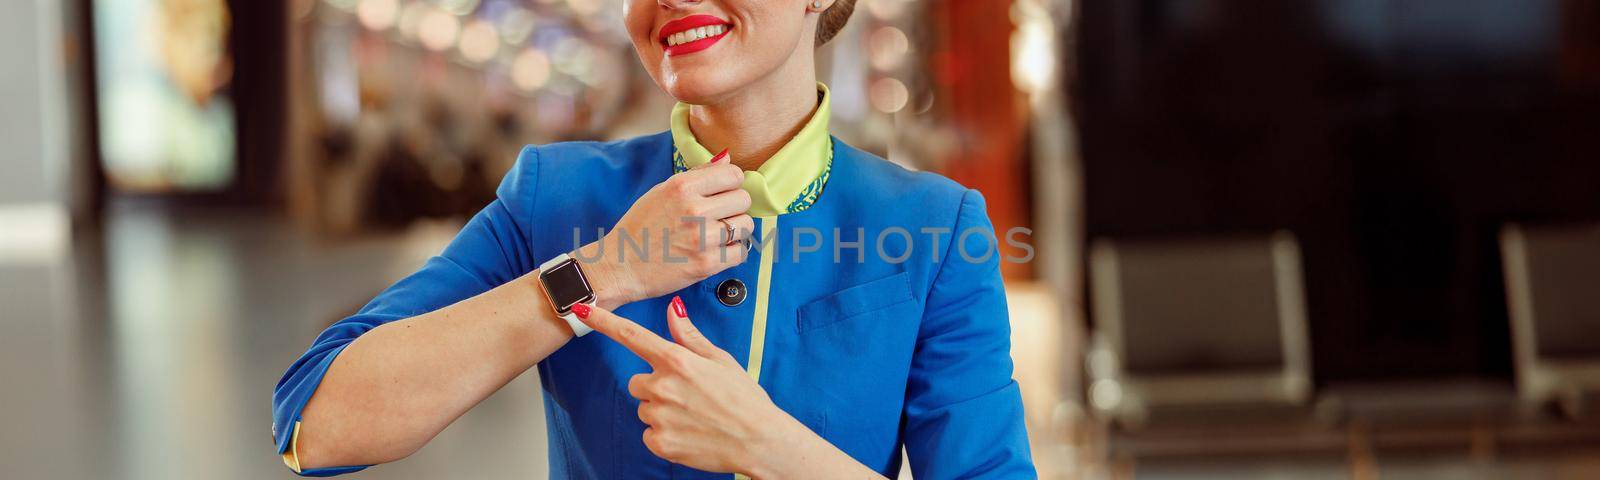 Joyful female flight attendant in air hostess uniform showing her wristwatch and smiling while standing in airport terminal